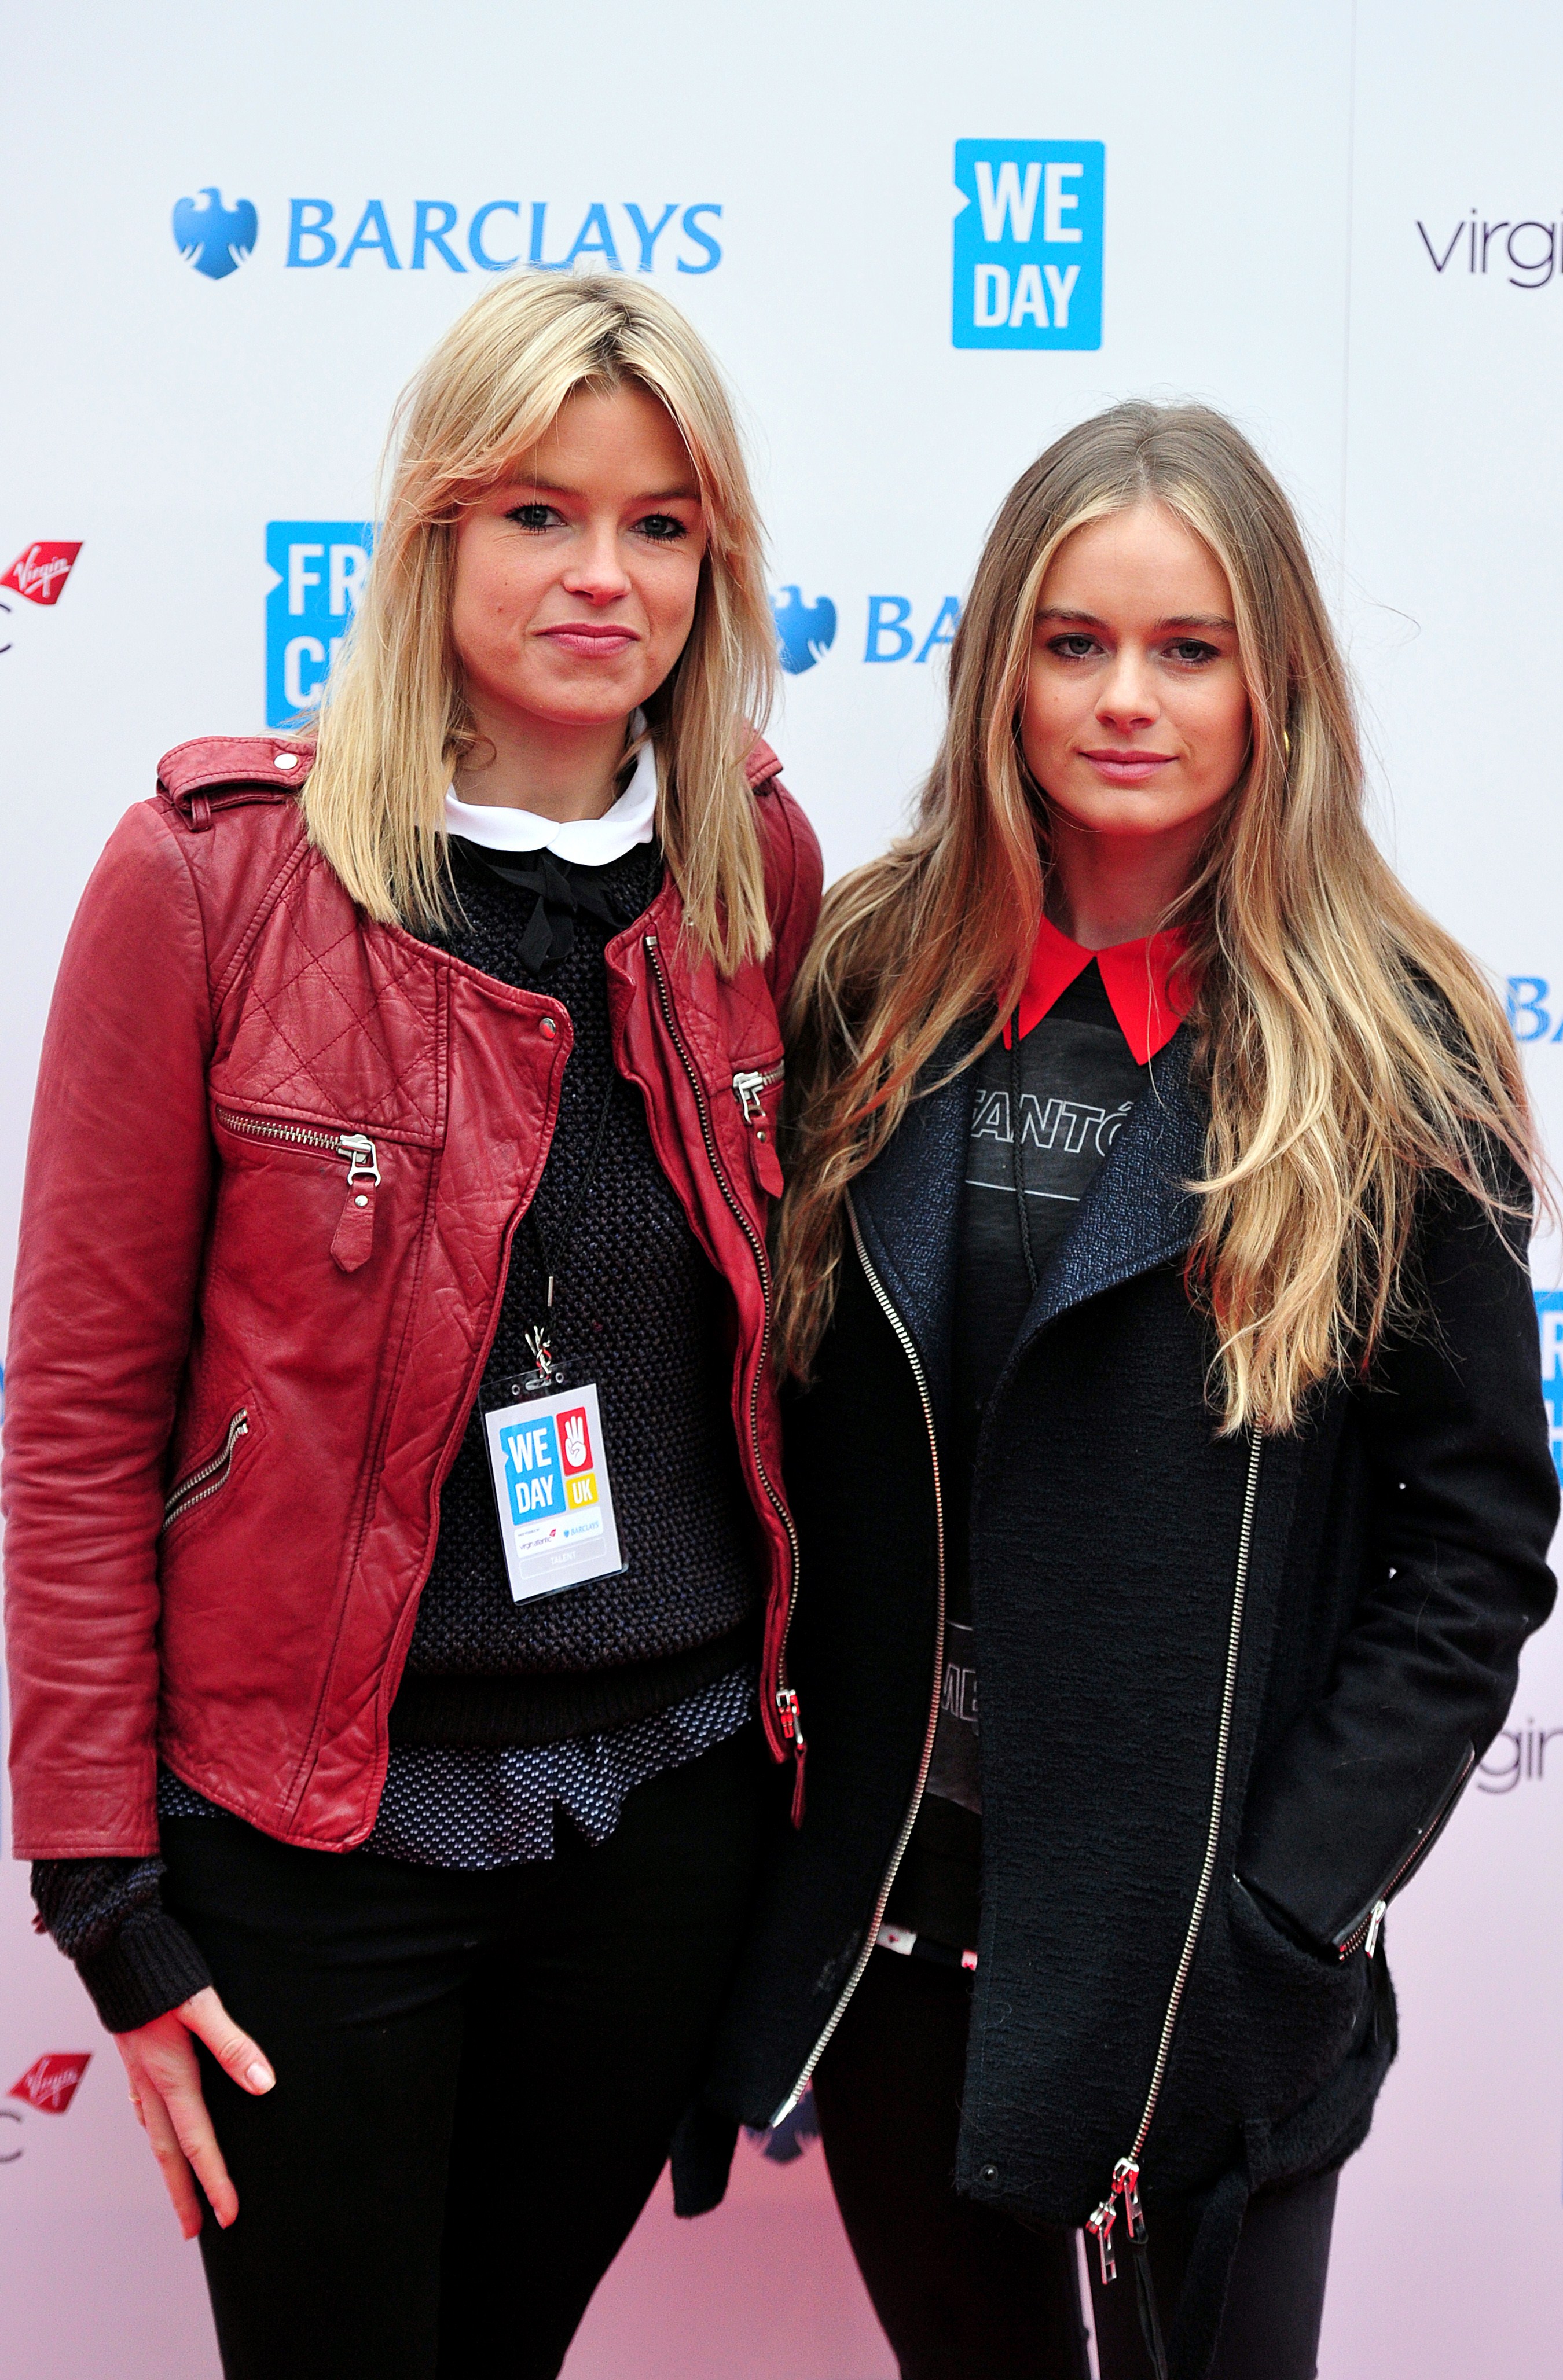 Isabella Calthorpe and Cressida Bonas arrive for the WE Day event on March 7, 2014 in London. | Source: Getty Images